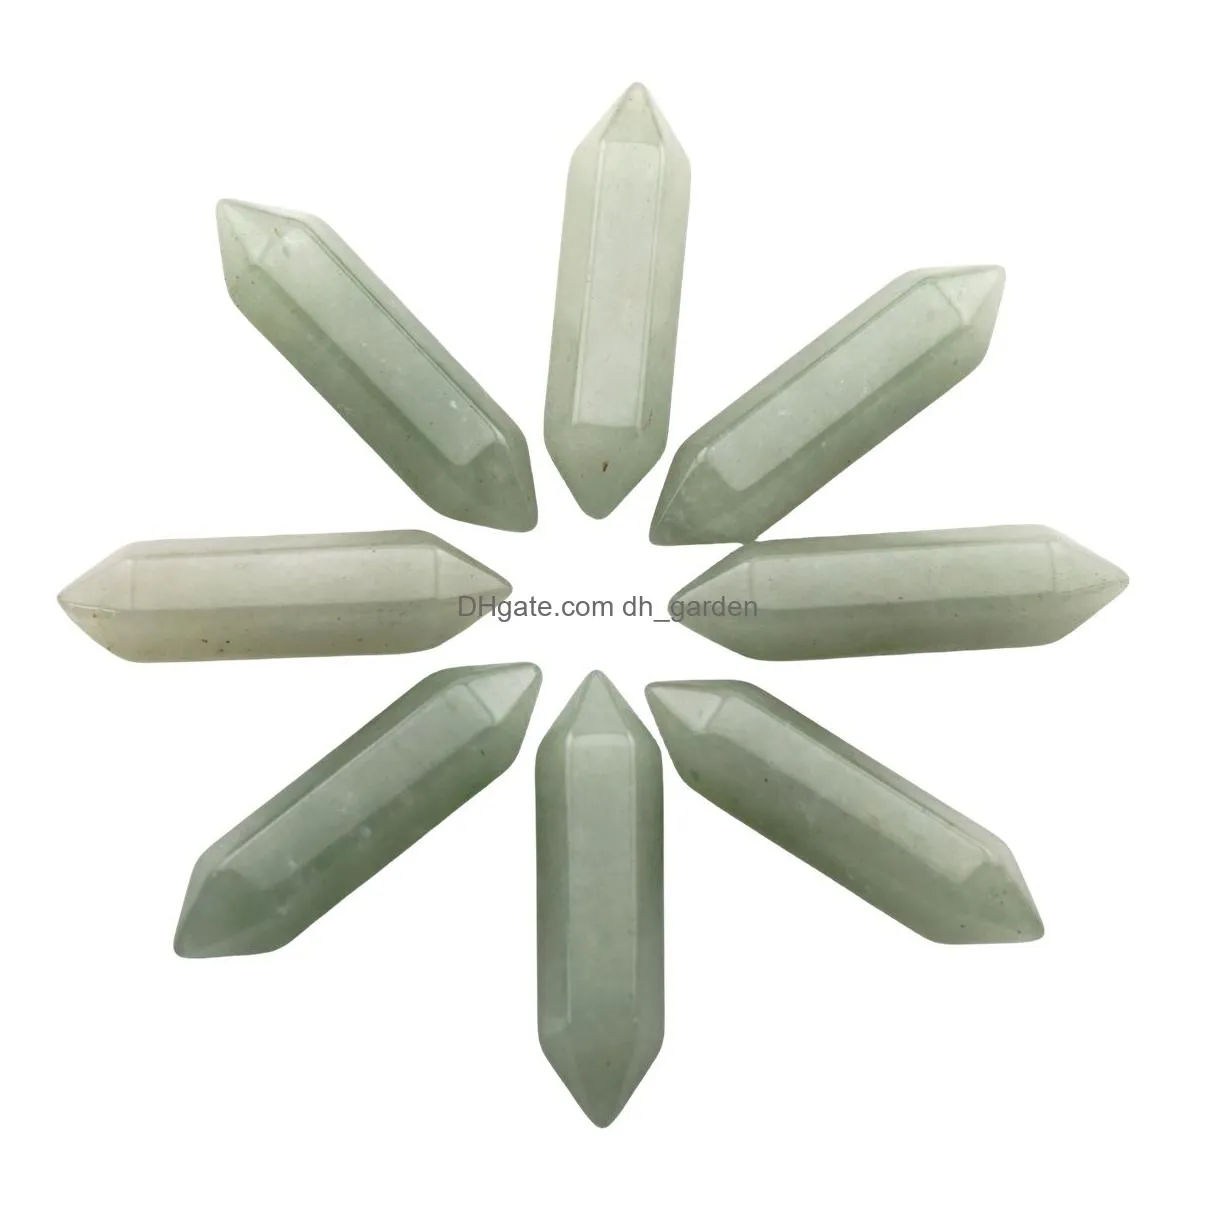 natural crystal double pointed hexagonal pillar raw stone diy jewelry material handmade as a gift to friends